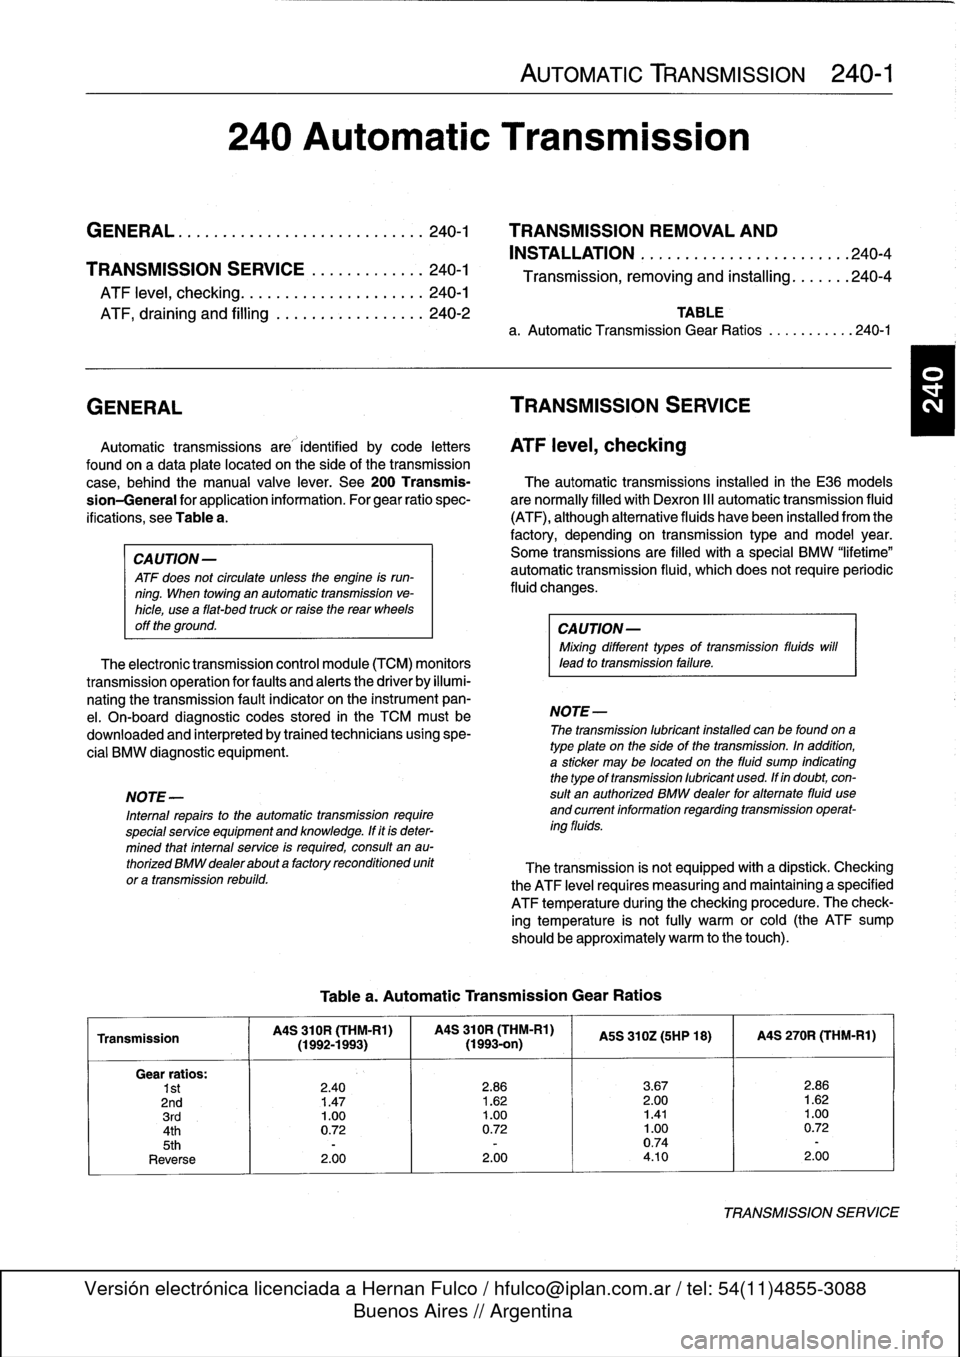 BMW 323i 1998 E36 Workshop Manual 
AUTOMATIC
TRANSMISSION

	

240-1

240
Automatic
Transmission

GENERAL
.....
.
.
.
.
.
.
.
.
.
.
.
.
.
.........
.
240-1

	

TRANSMISSION
REMOVAL
AND

INSTALLATION
..................
.
.
.
.
.240-4
TR